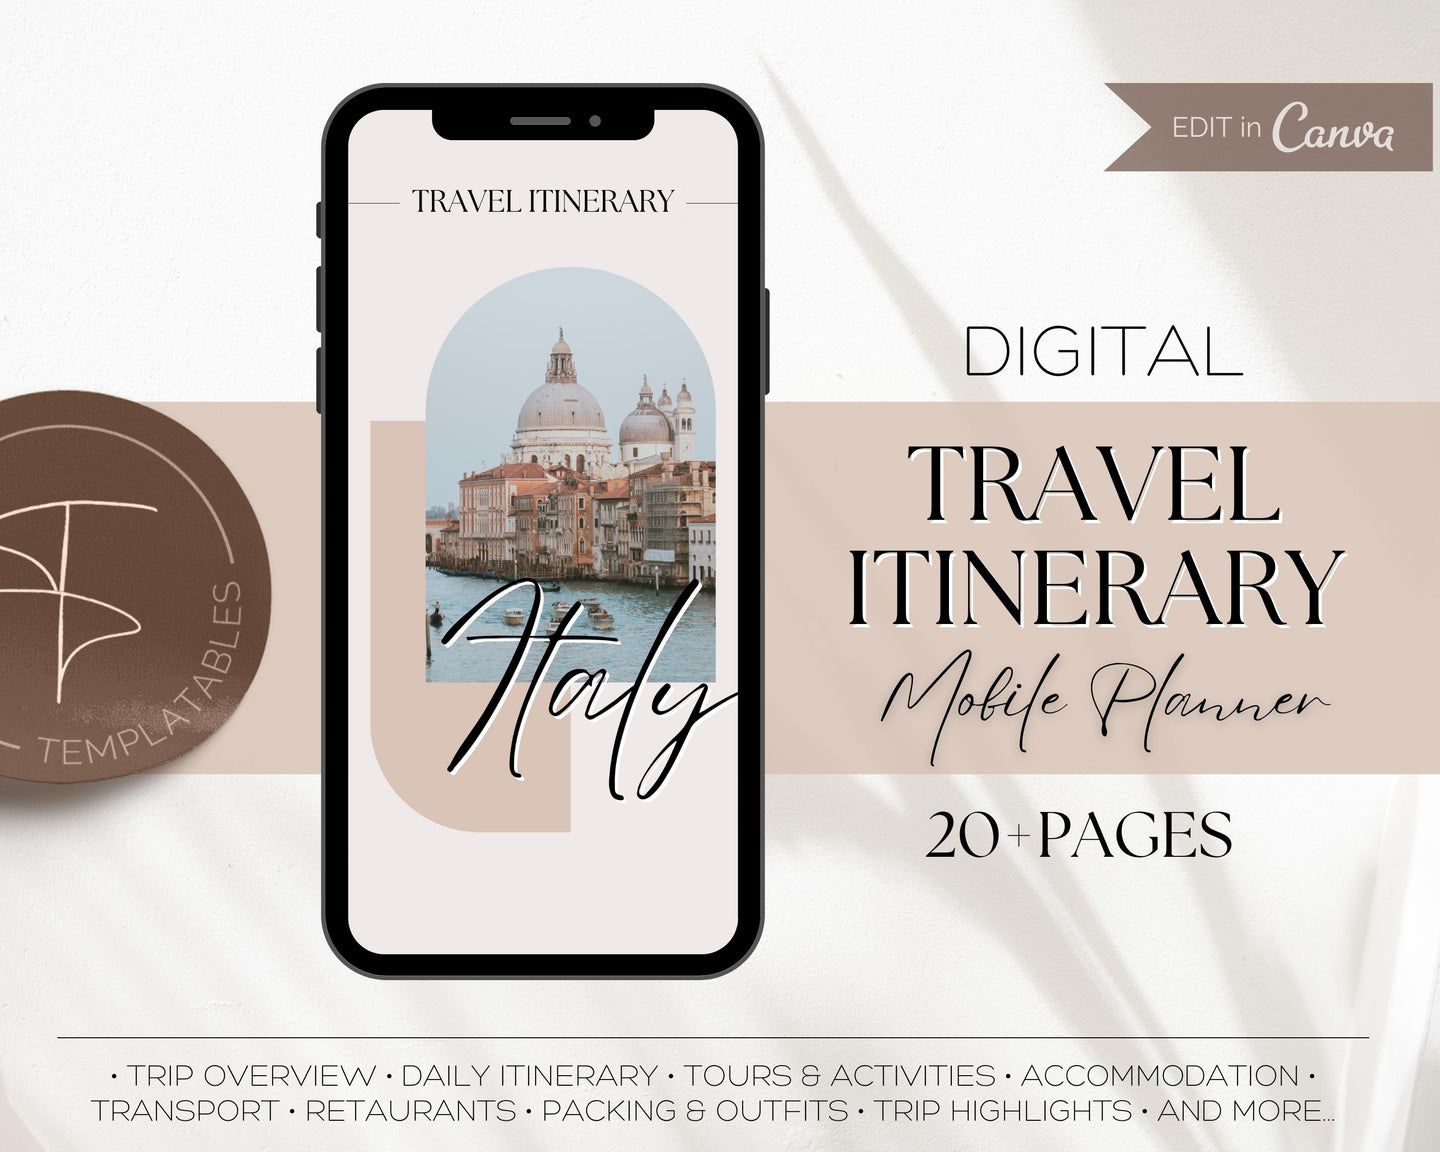 MOBILE Travel Itinerary Template | Create Your Travel Guide Itinerary for Weekend Trips, Birthdays, Girls Trips with Canva